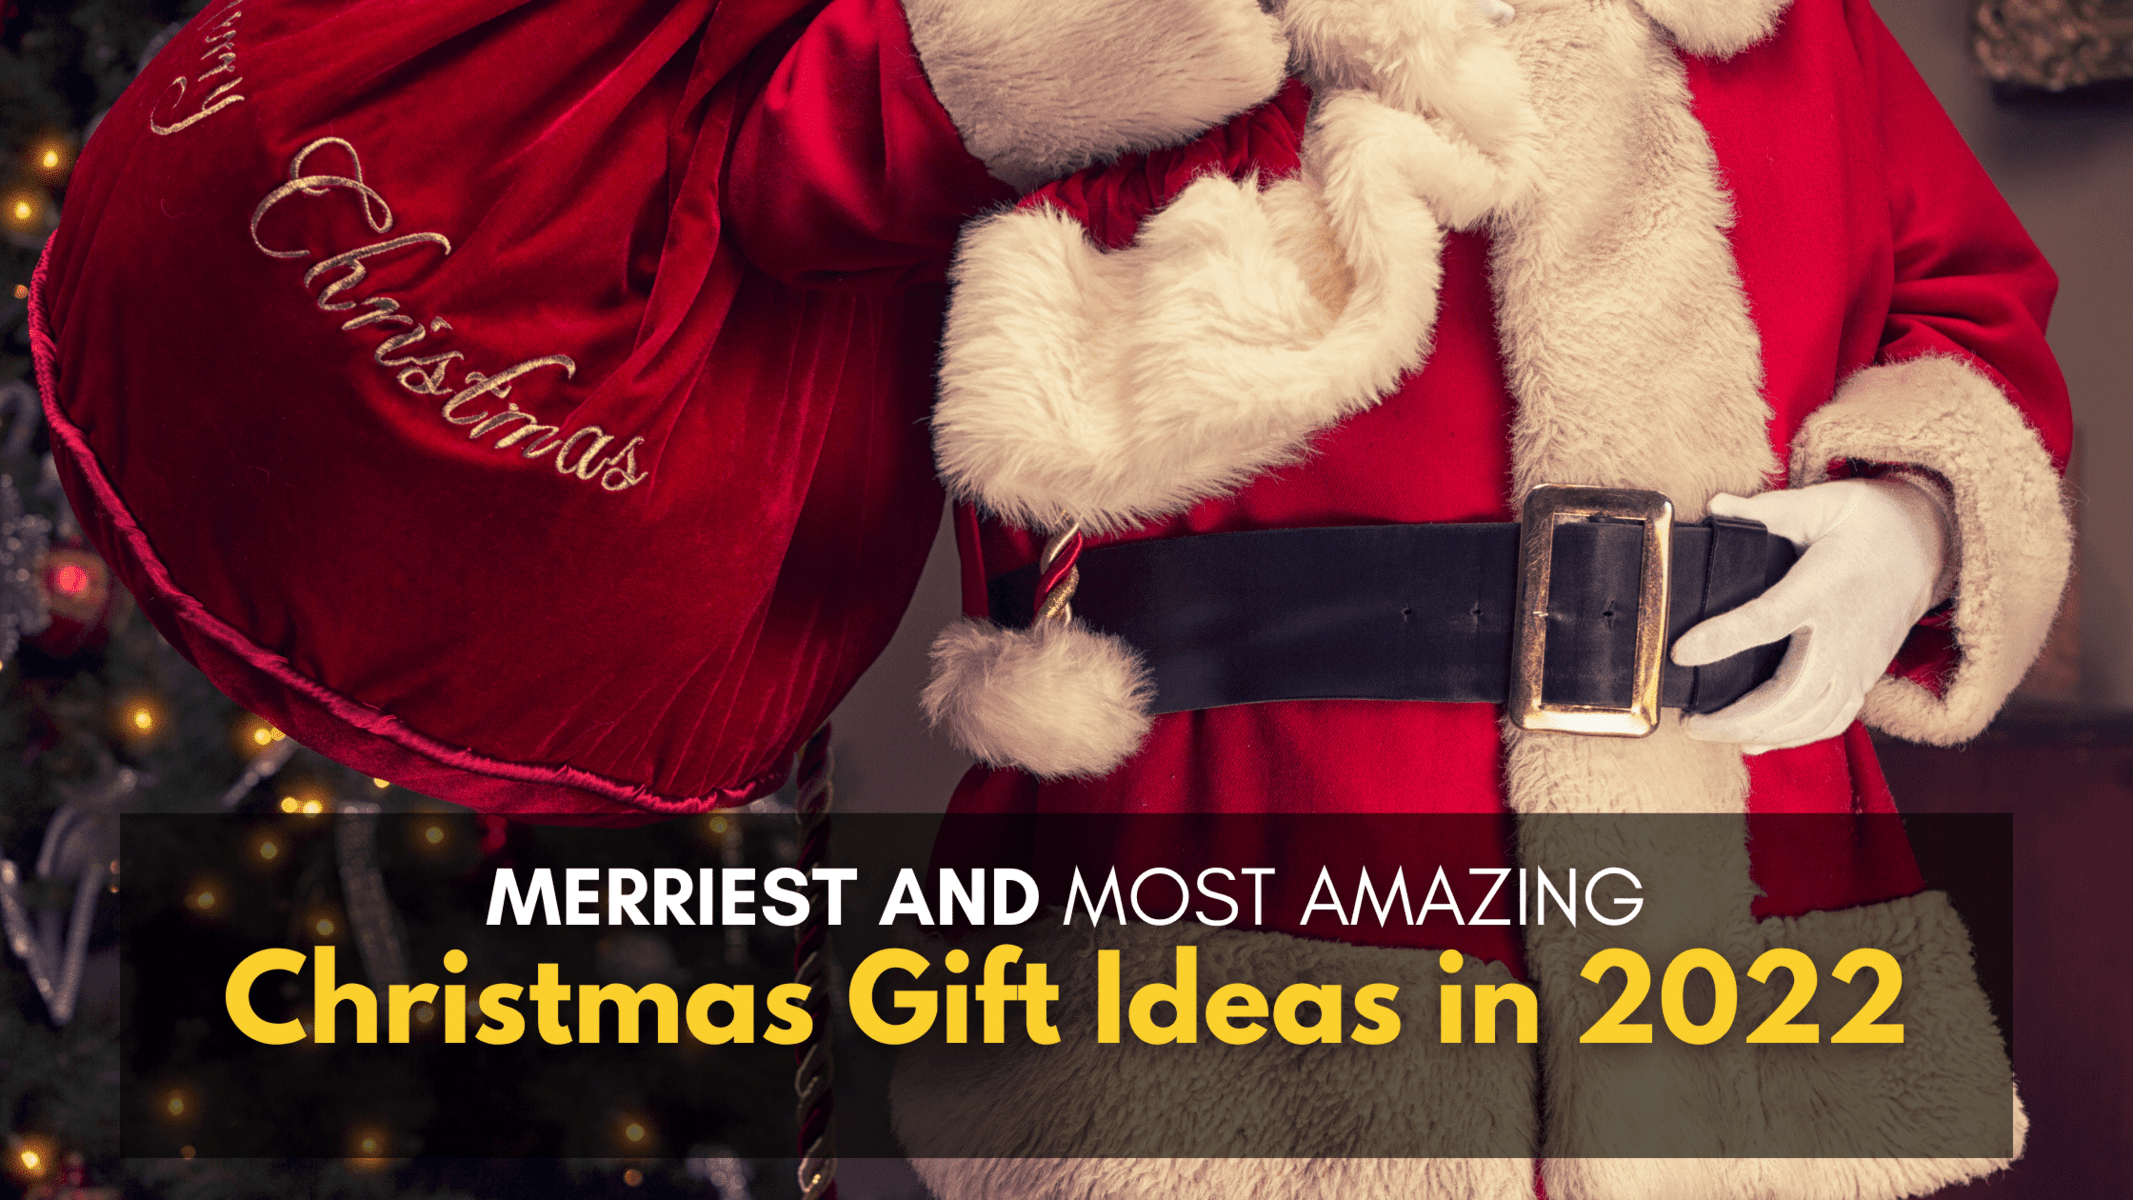 Merriest Christmas Gift Ideas to shop for your loved ones in 2022- CherishX